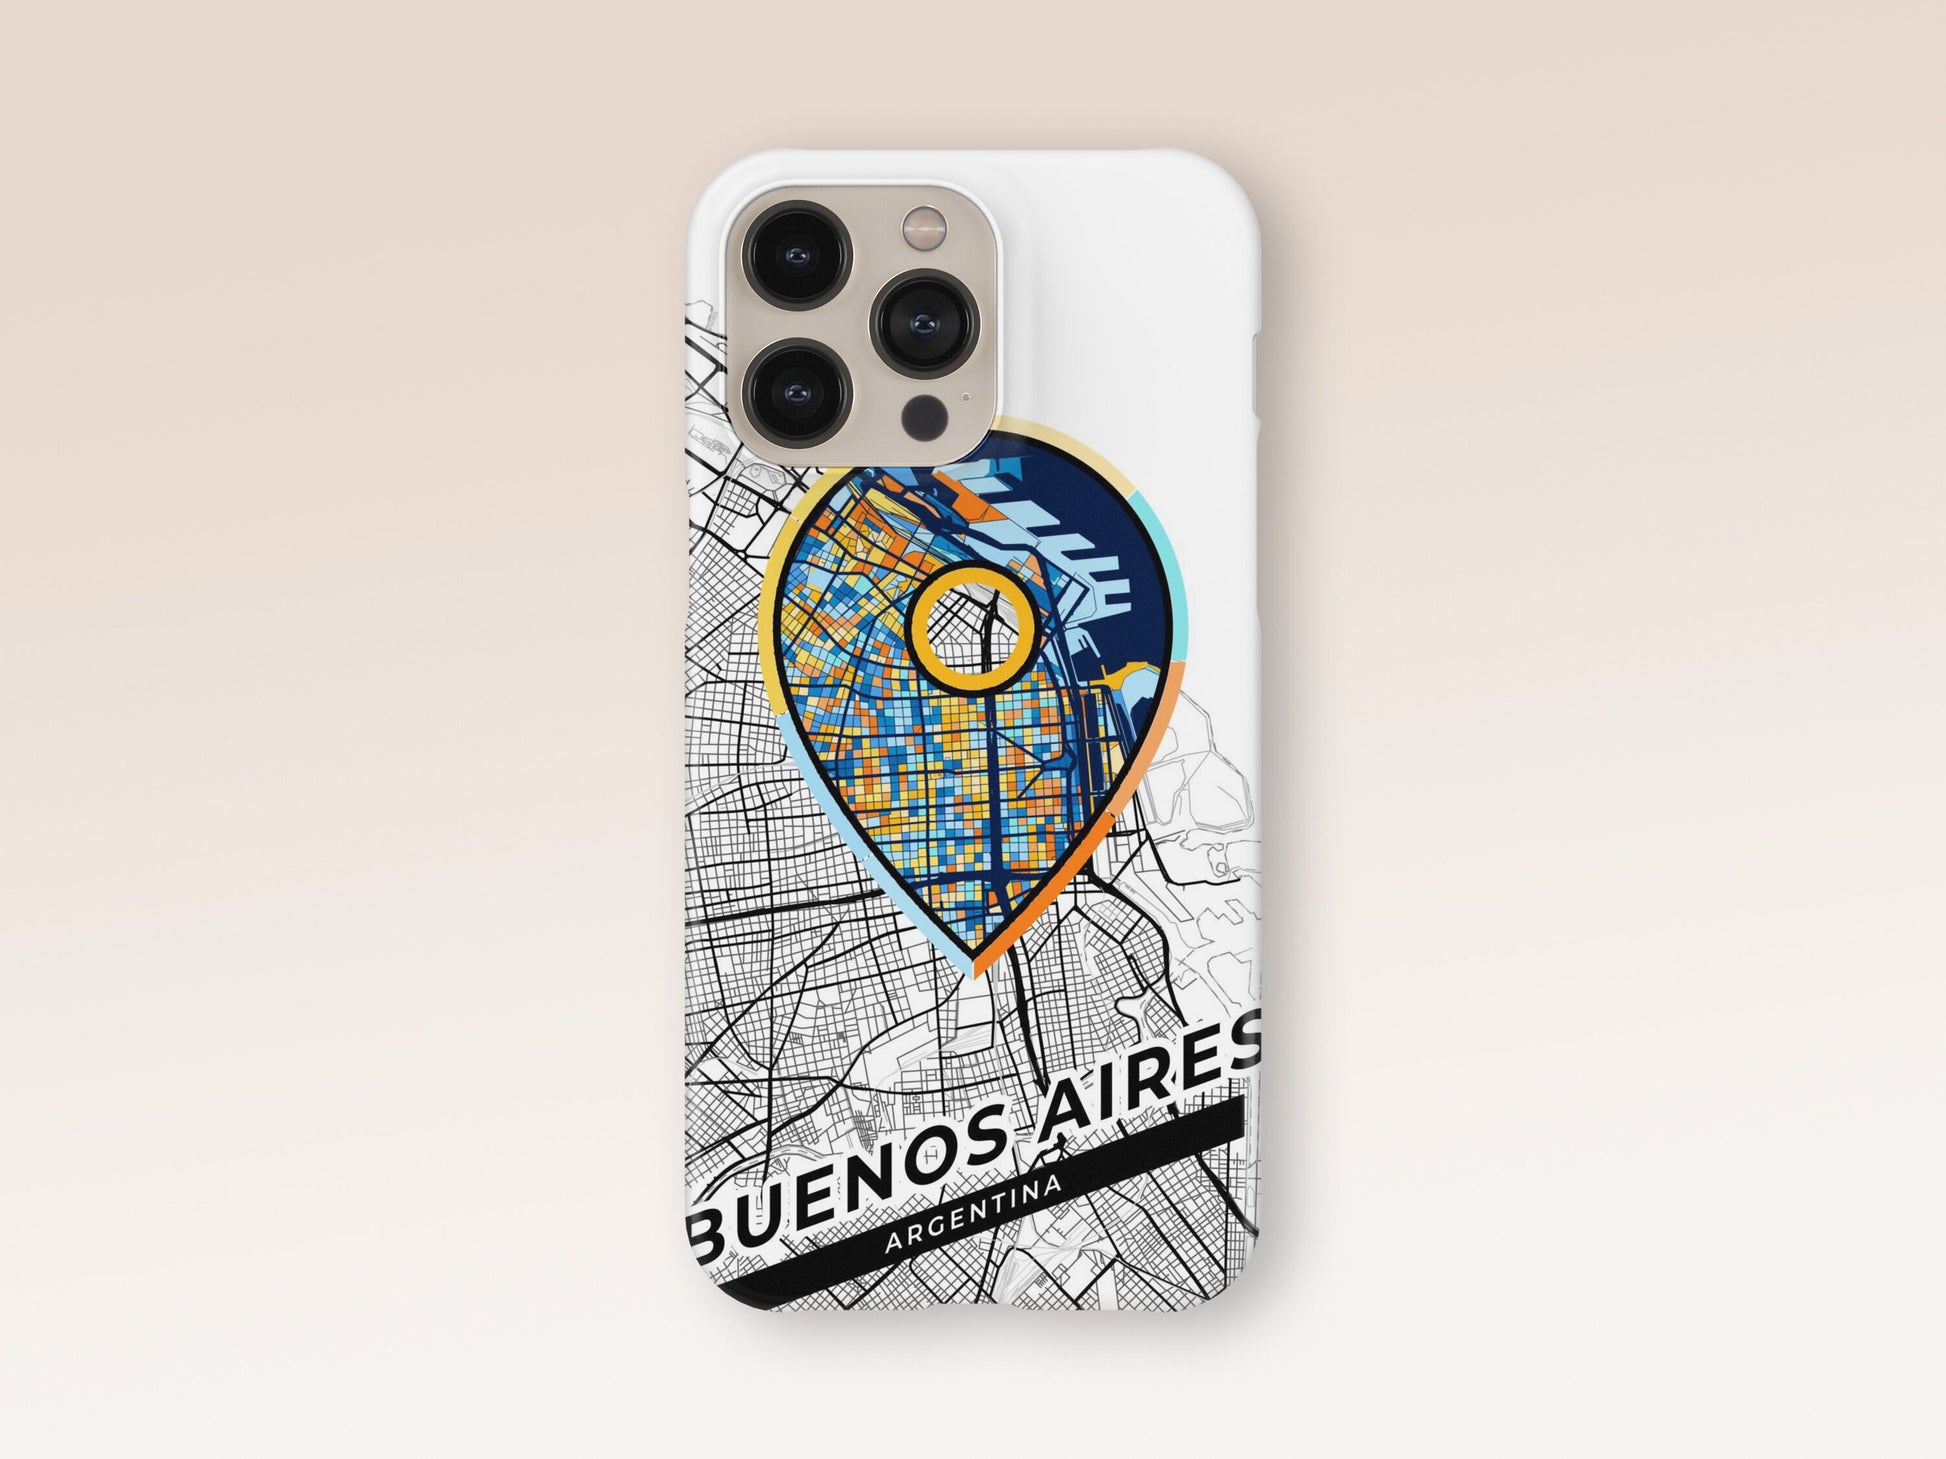 Buenos Aires Argentina slim phone case with colorful icon. Birthday, wedding or housewarming gift. Couple match cases. 1